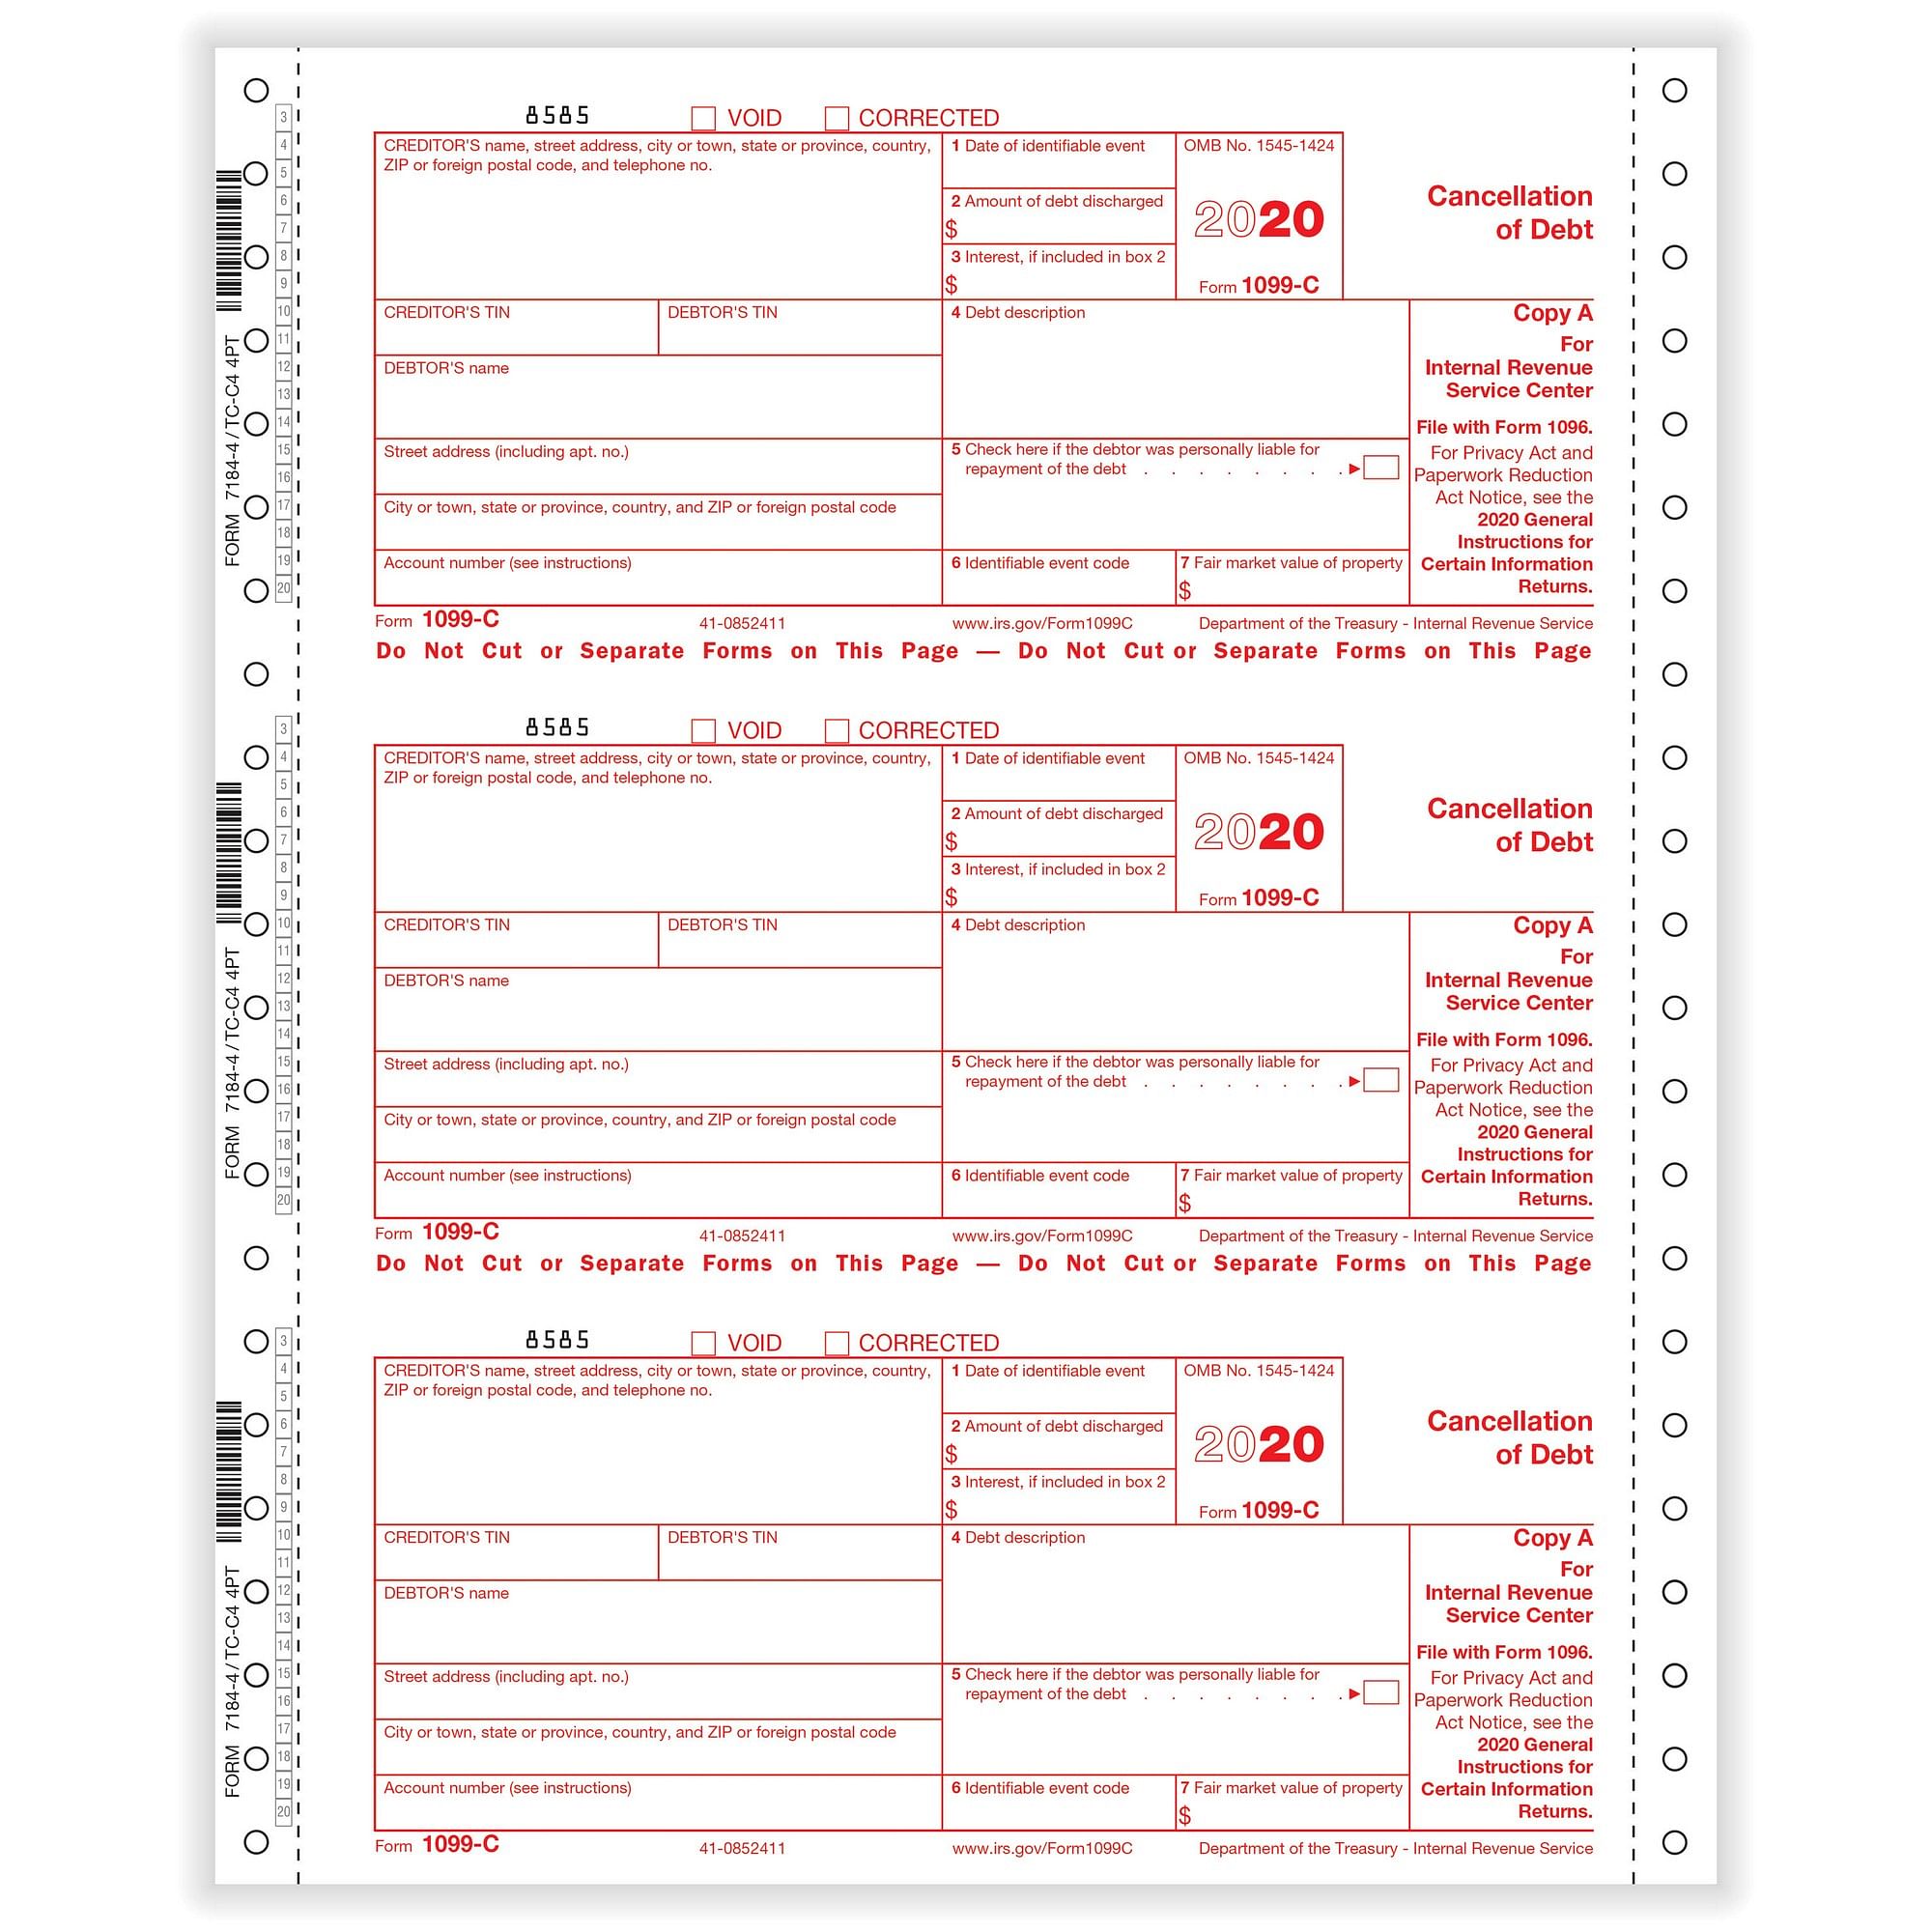 1099 C Cancellation Of Debt 4 Part 1 Wide Carbonless 0 Forms Pack